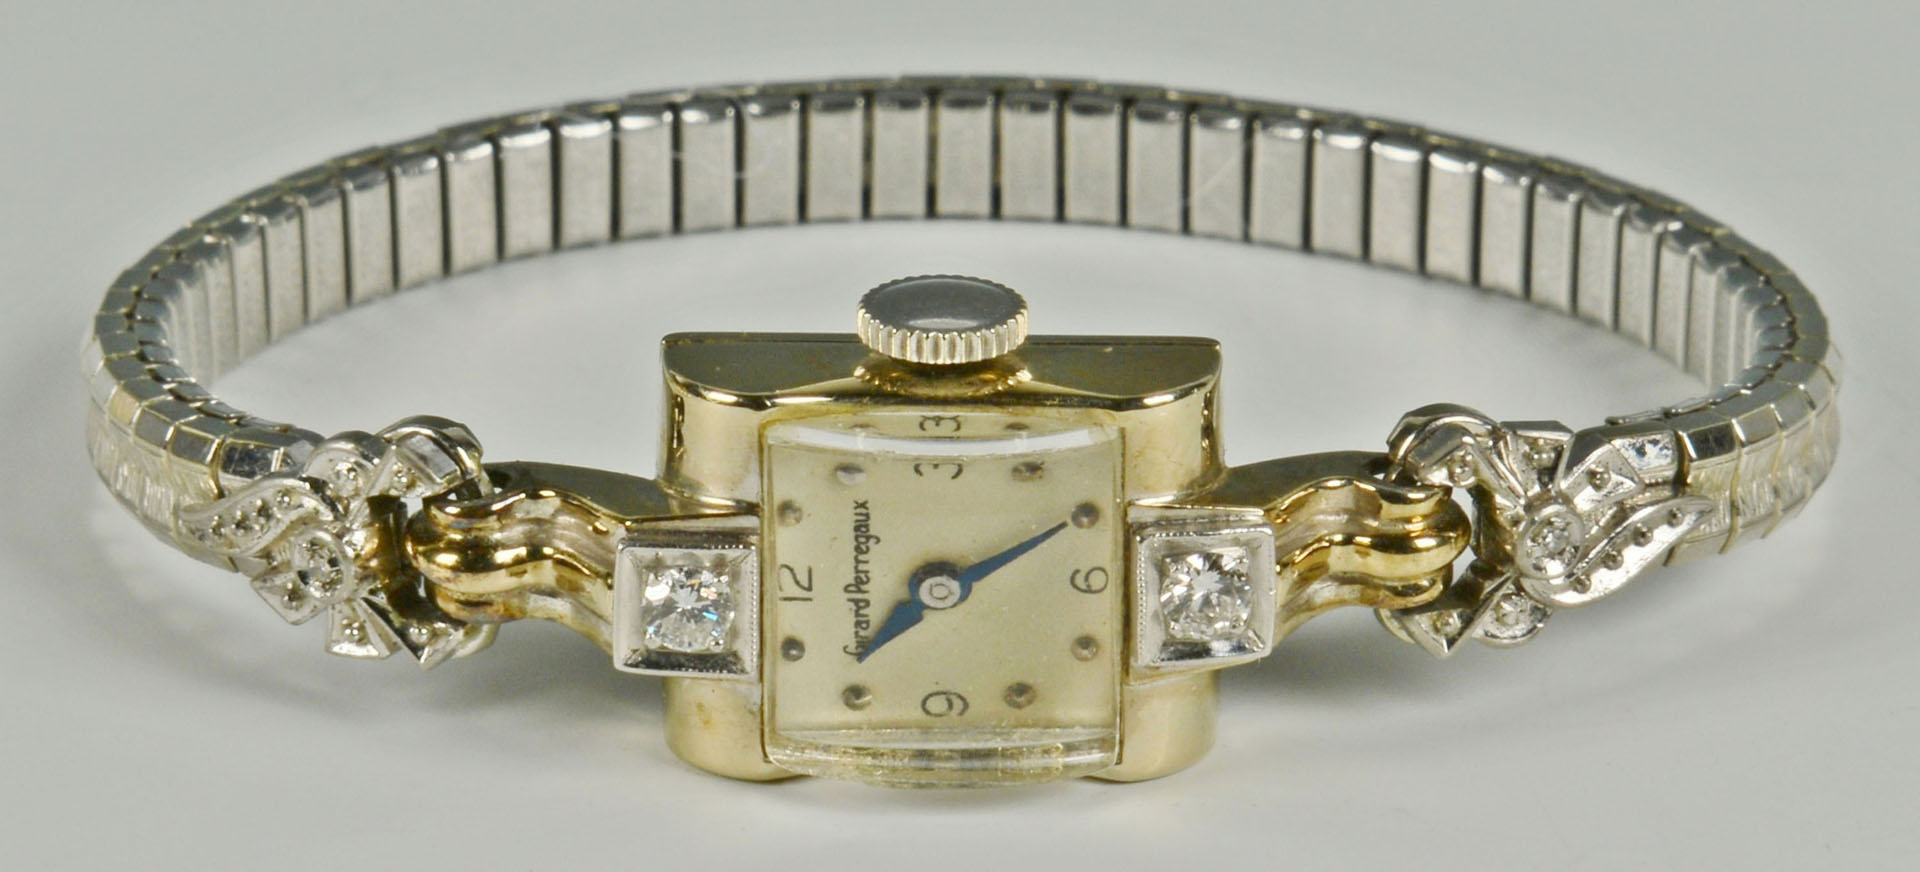 Lot 313: 4 pcs Ladies Jewelry inc. gold watches & pearls